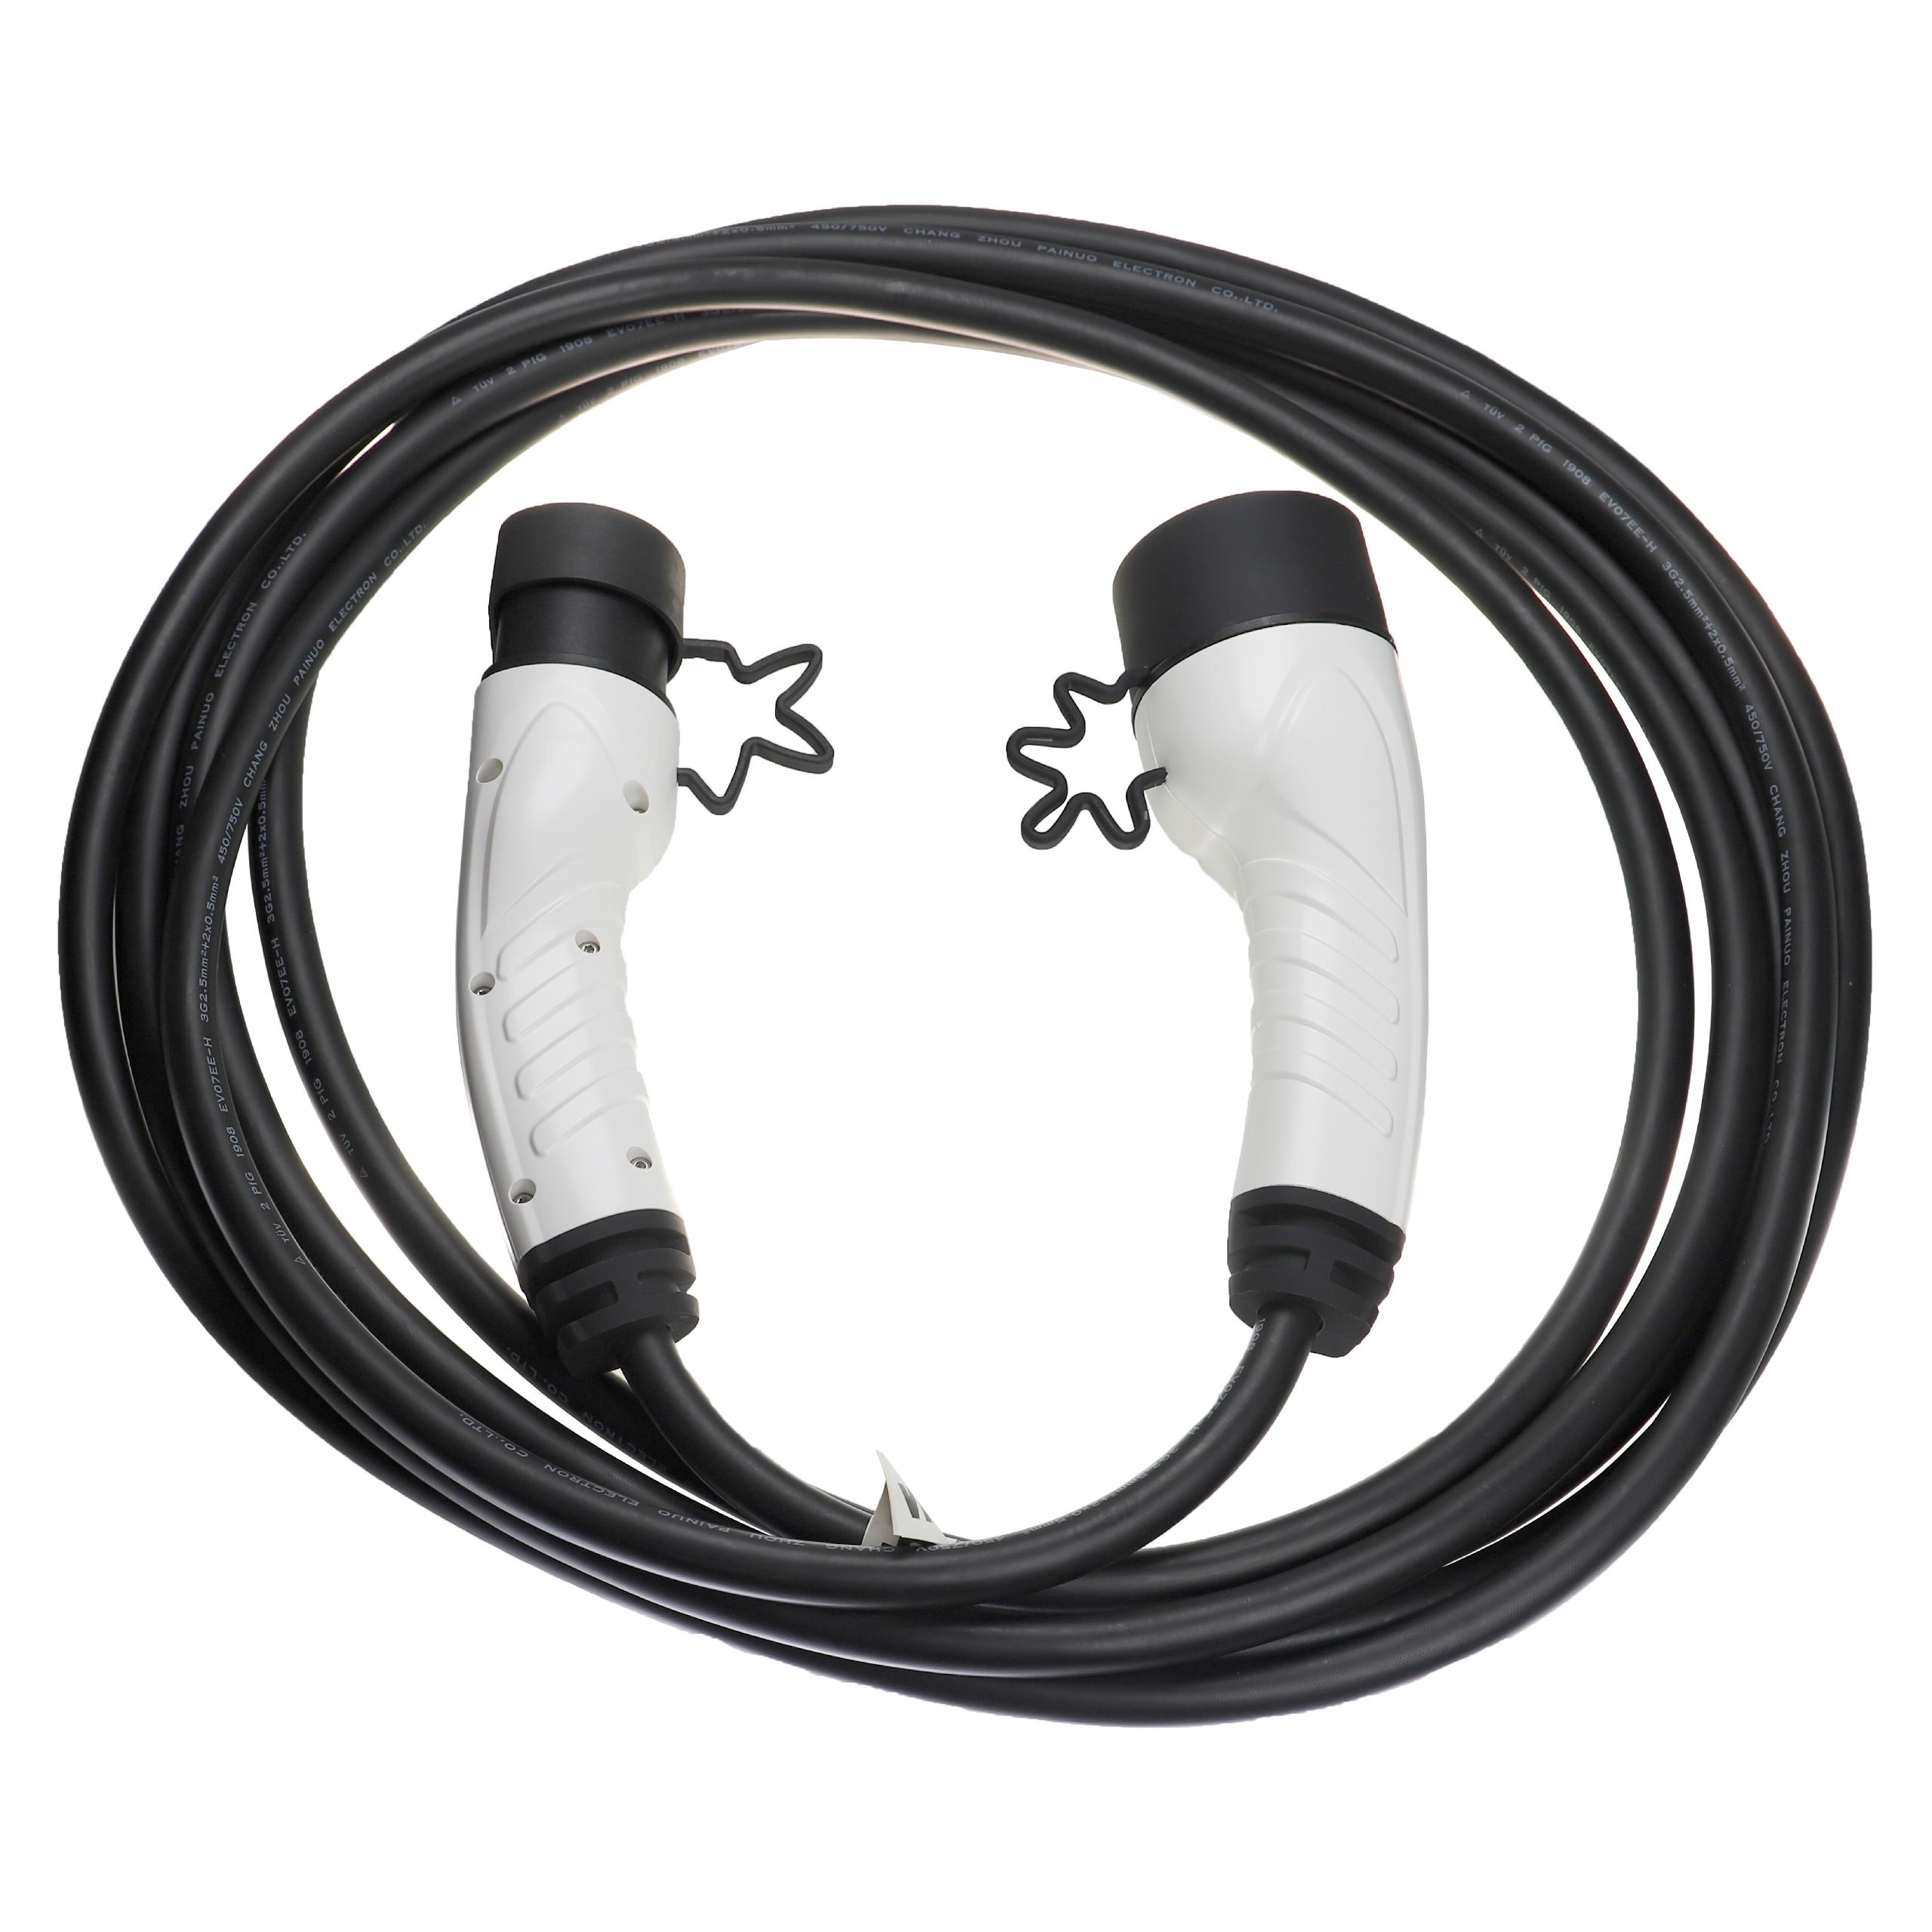 Charging Cable for Electric Car, Plug-In Hybrid - Type 2 to Type 2 Cable, Single-Phase, 16 A, 3.5 kW, 7 m